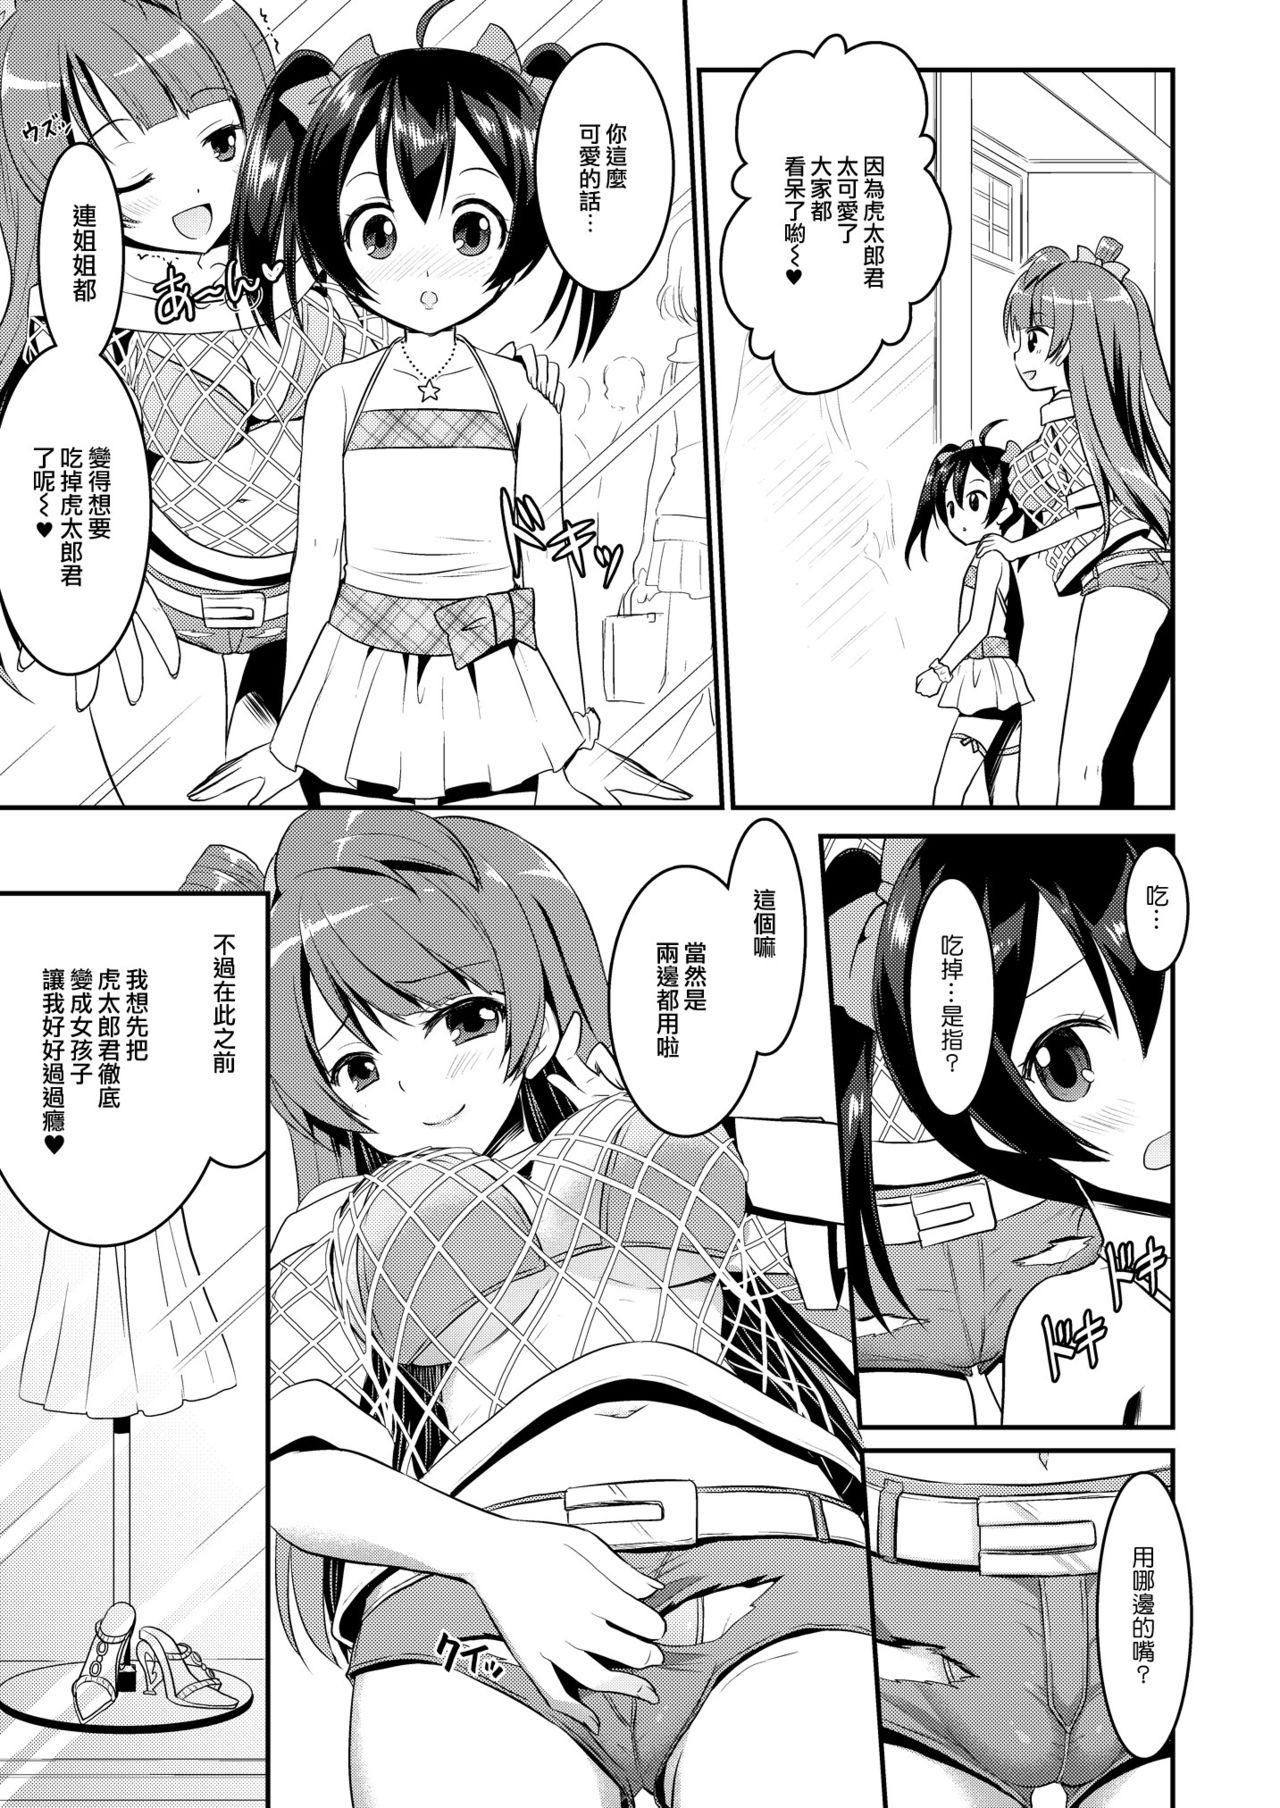 Whipping Eat Meat Girl 4 - Love live Bed - Page 9